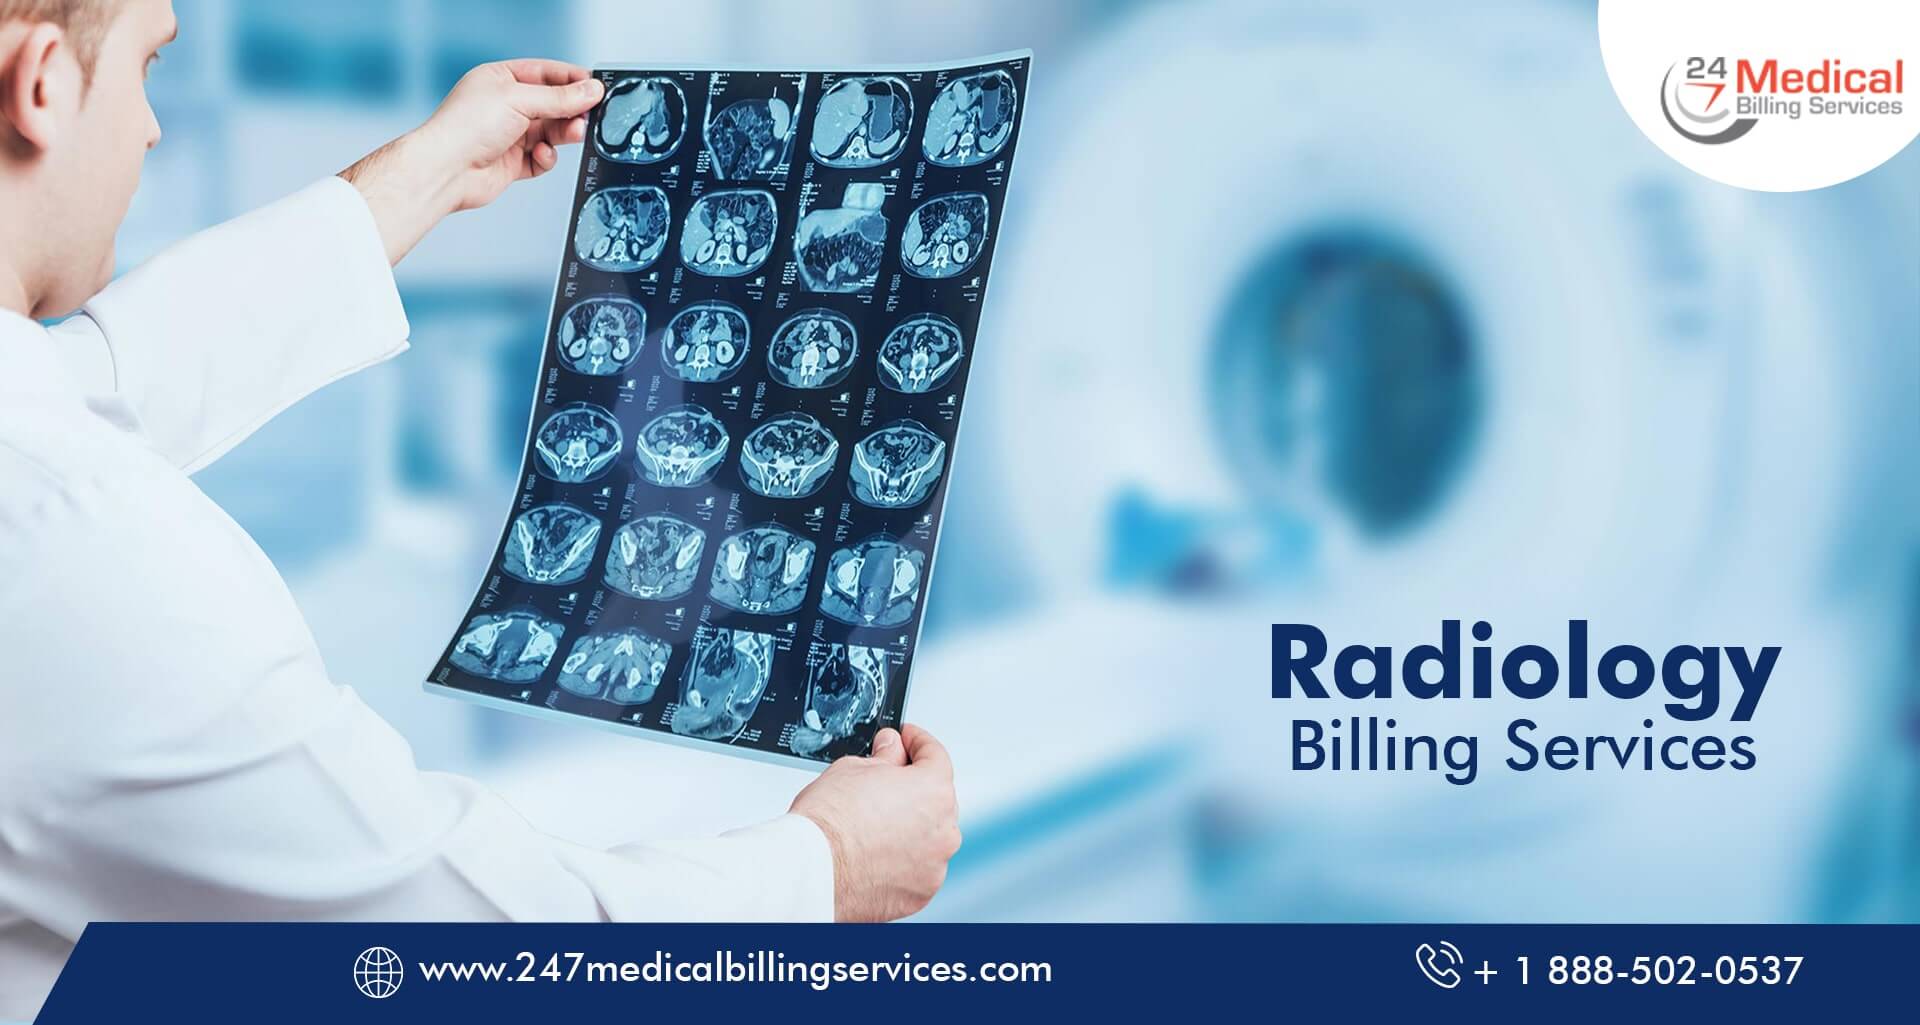 Radiology Billing Services in New Orleans, Louisiana (LA) - 24/7 Medical Billing Services